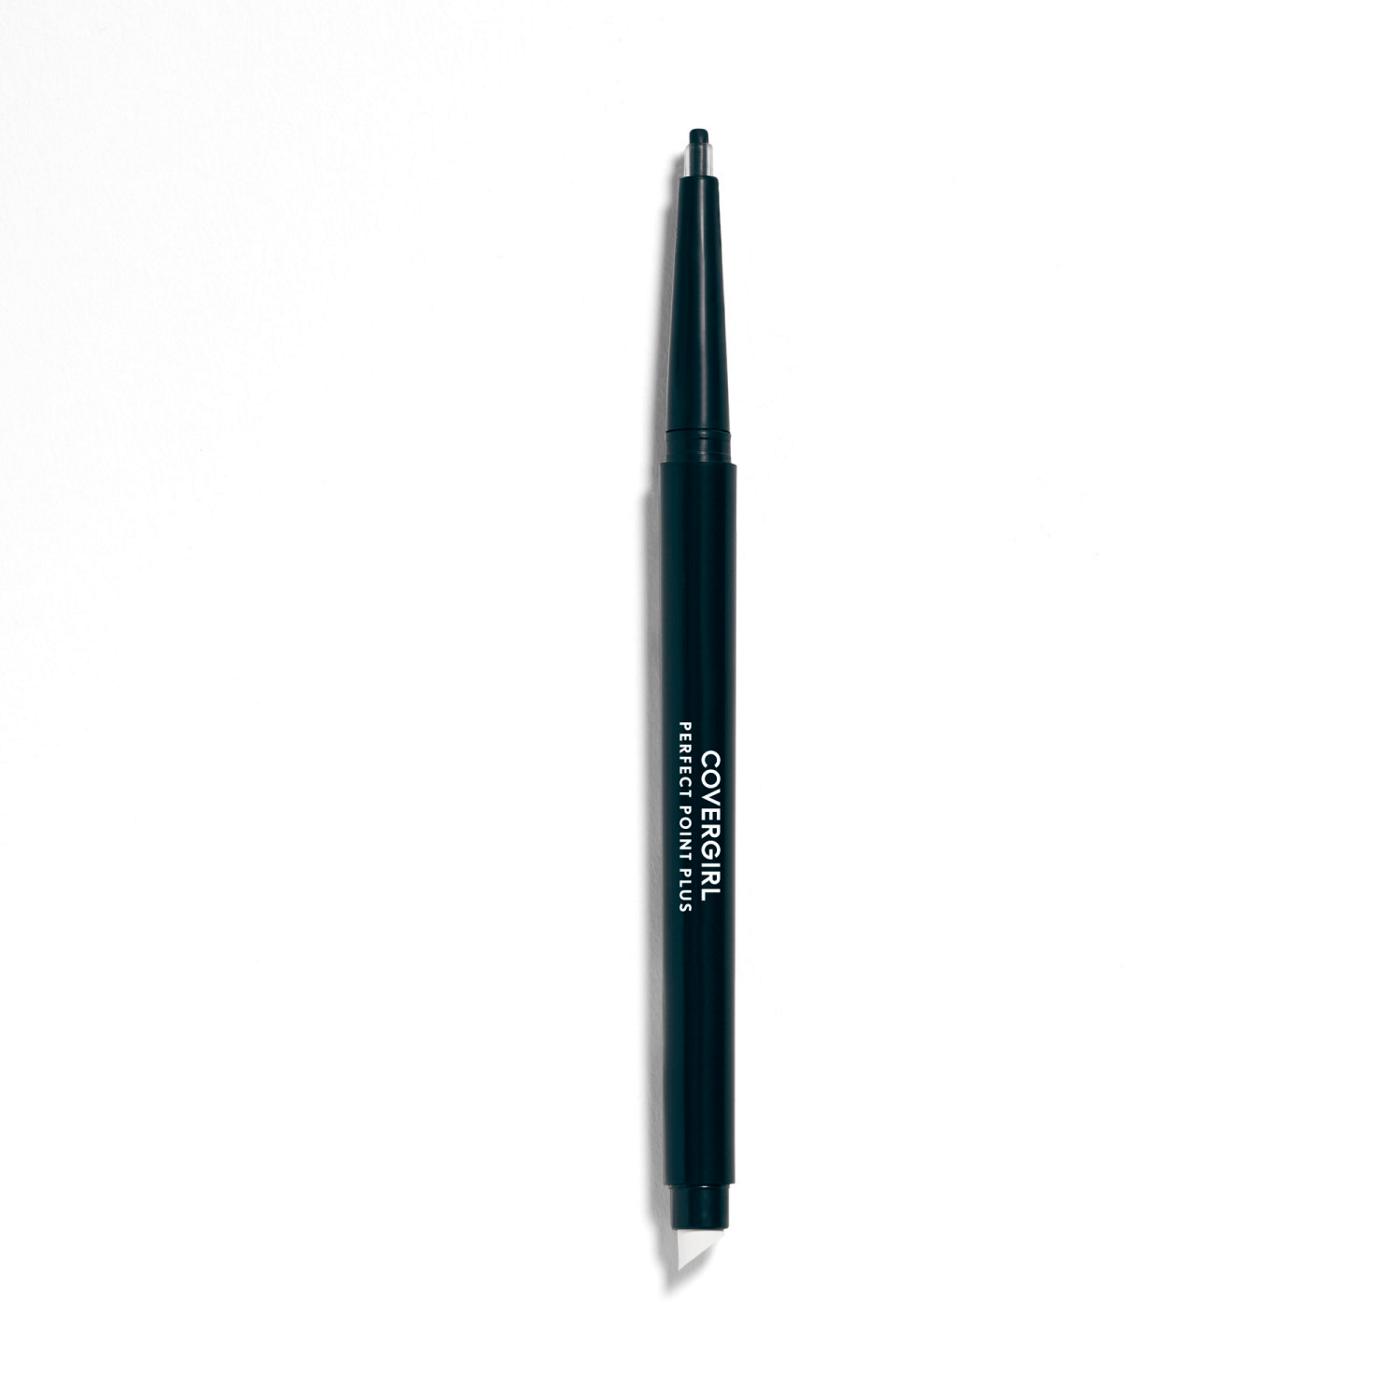 Covergirl Perfect Point Plus Eyeliner 200 Black Onyx Value Pack; image 2 of 3